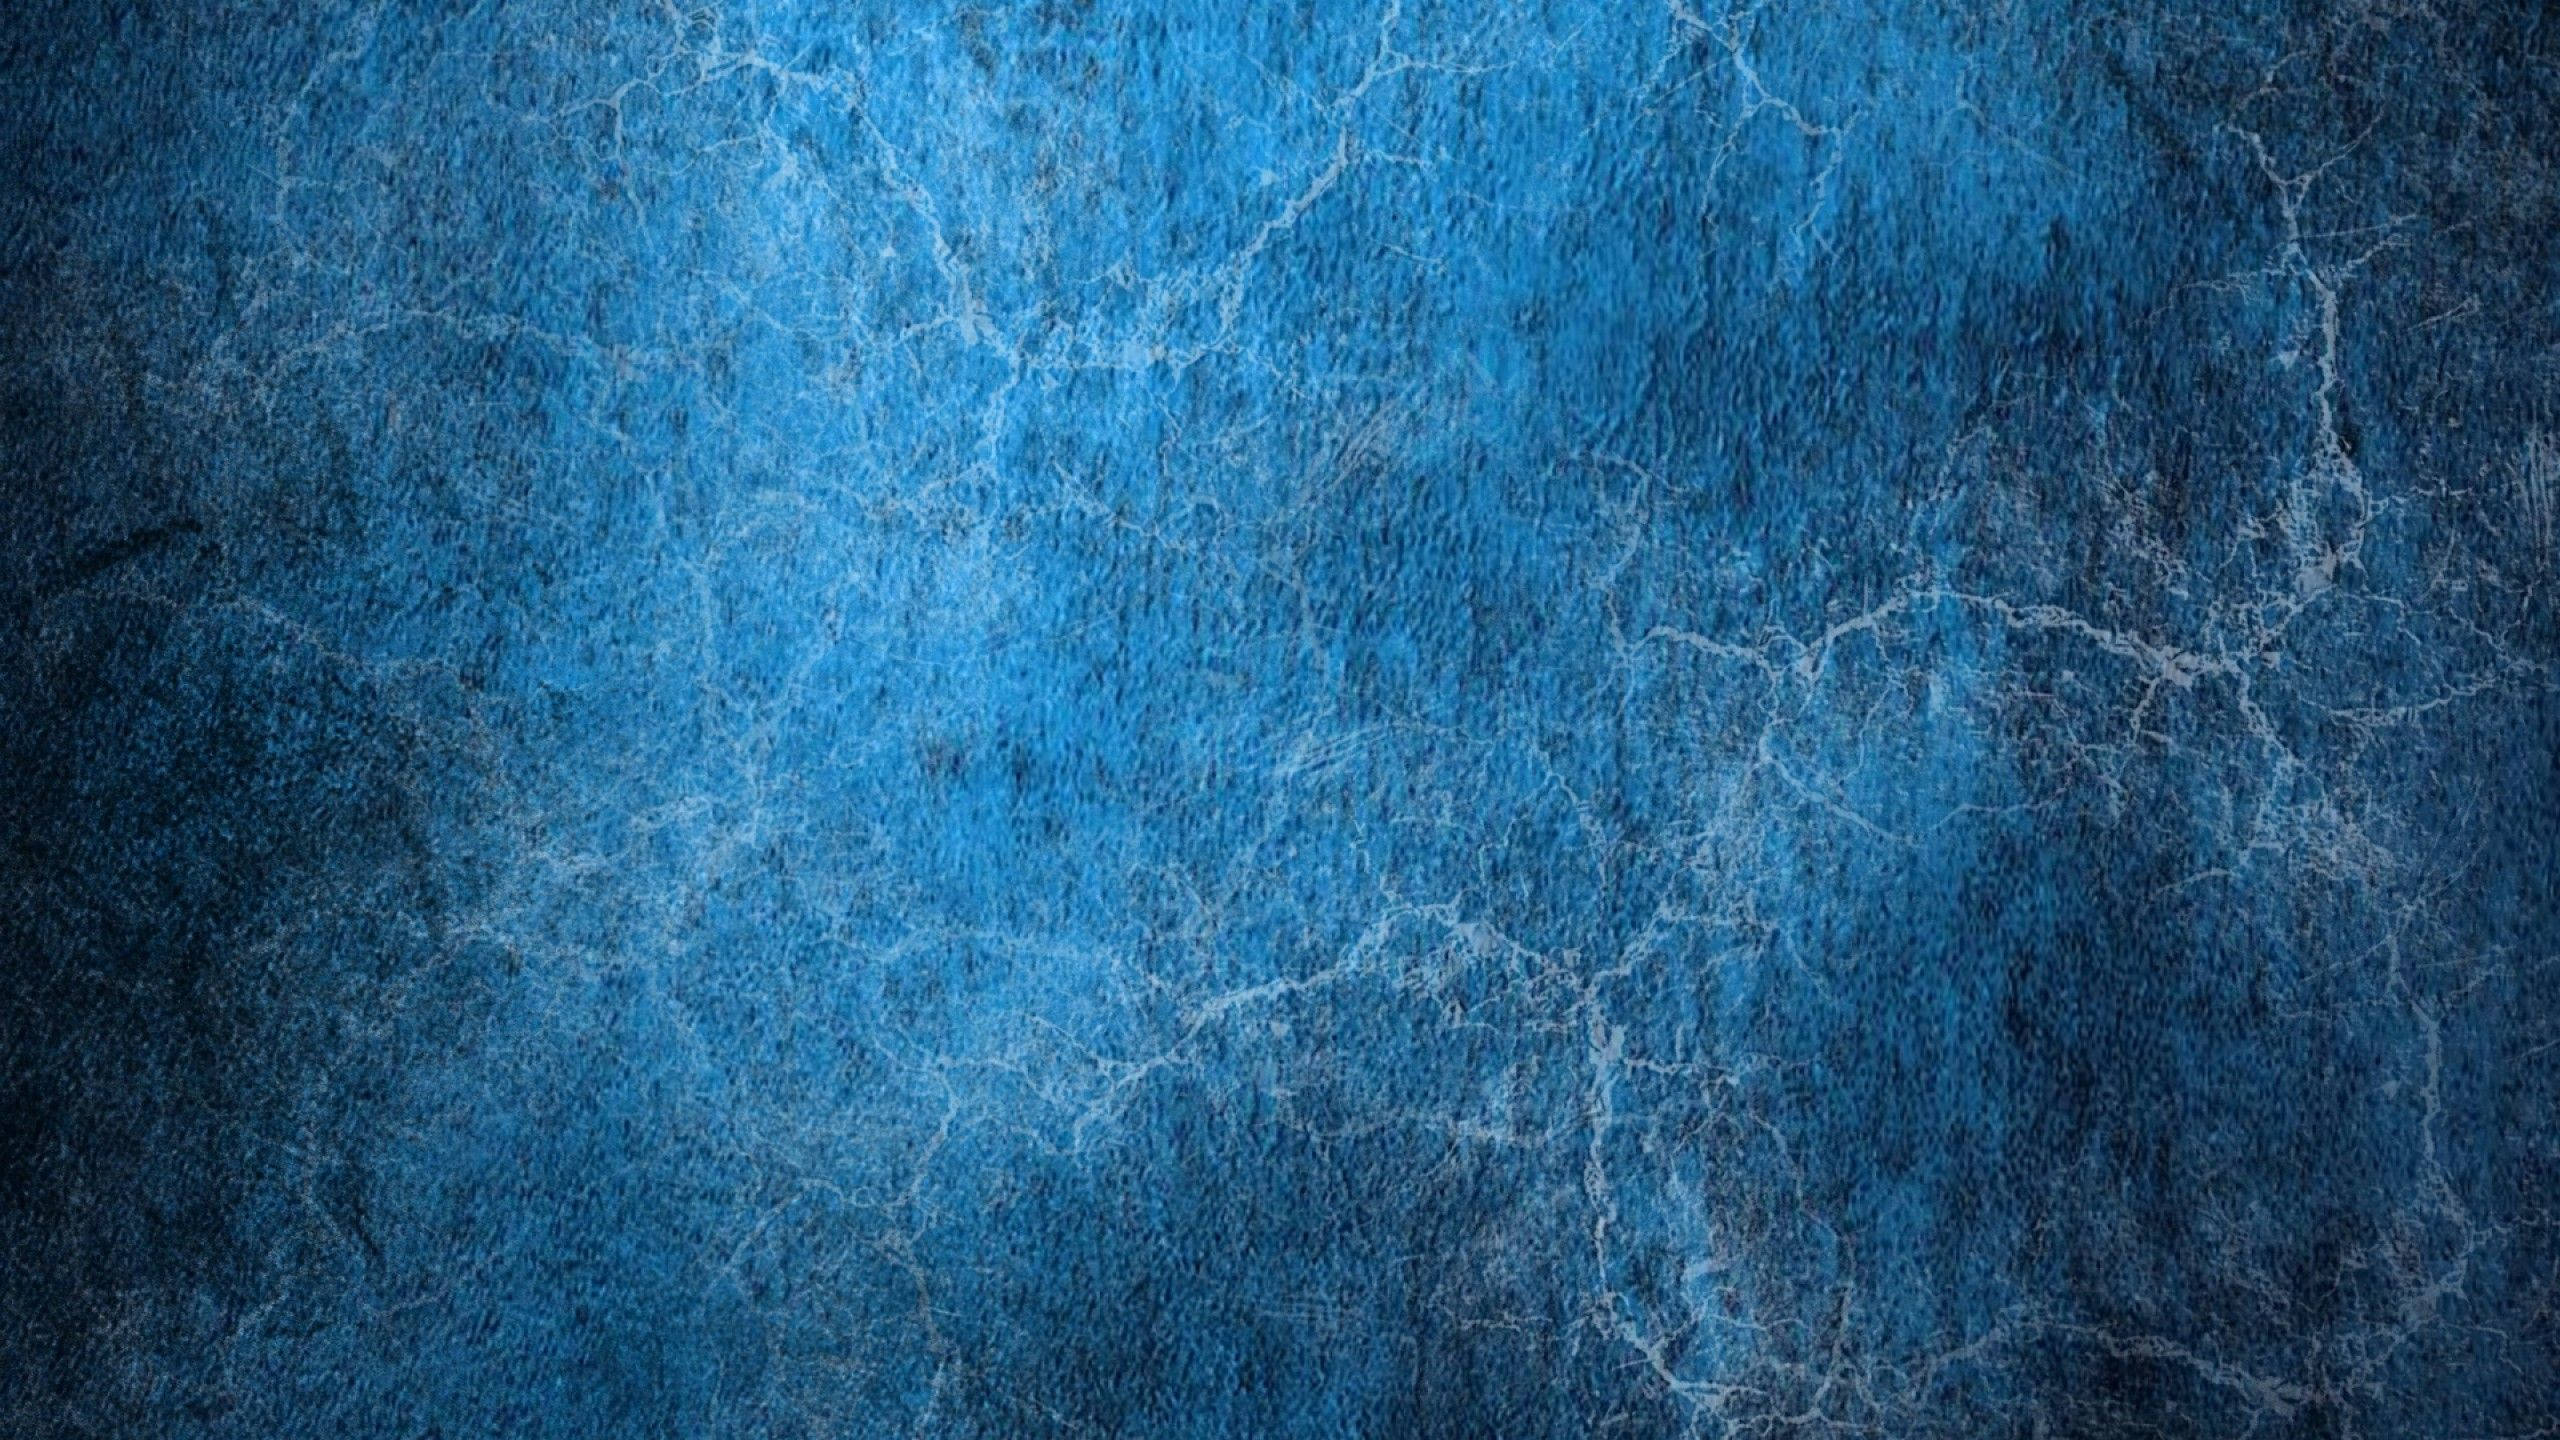 Stunning Blue Cracked Wall Texture | Youtube Channel Art